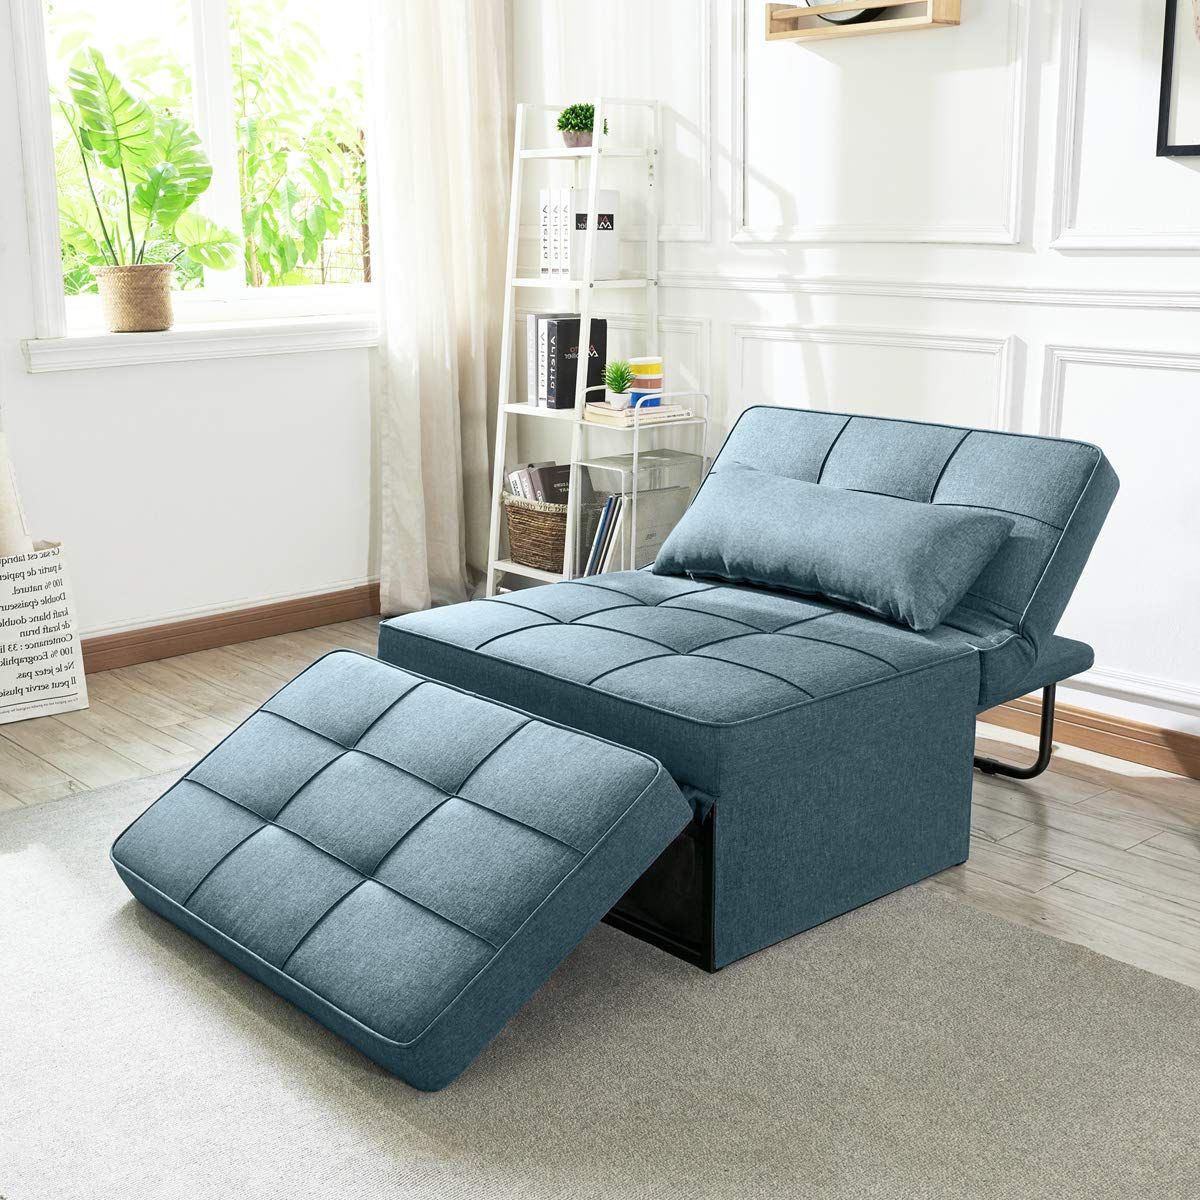 Amazon: Vonanda Sofa Bed, Convertible Chair 4 In 1 Multi Function Folding  Ottoman Modern Breathable Linen Guest Bed With Adjustable Sleeper For Small  Room Apartment,denim Blue : Home & Kitchen Throughout Popular Blue Folding Bed Ottomans (View 3 of 10)